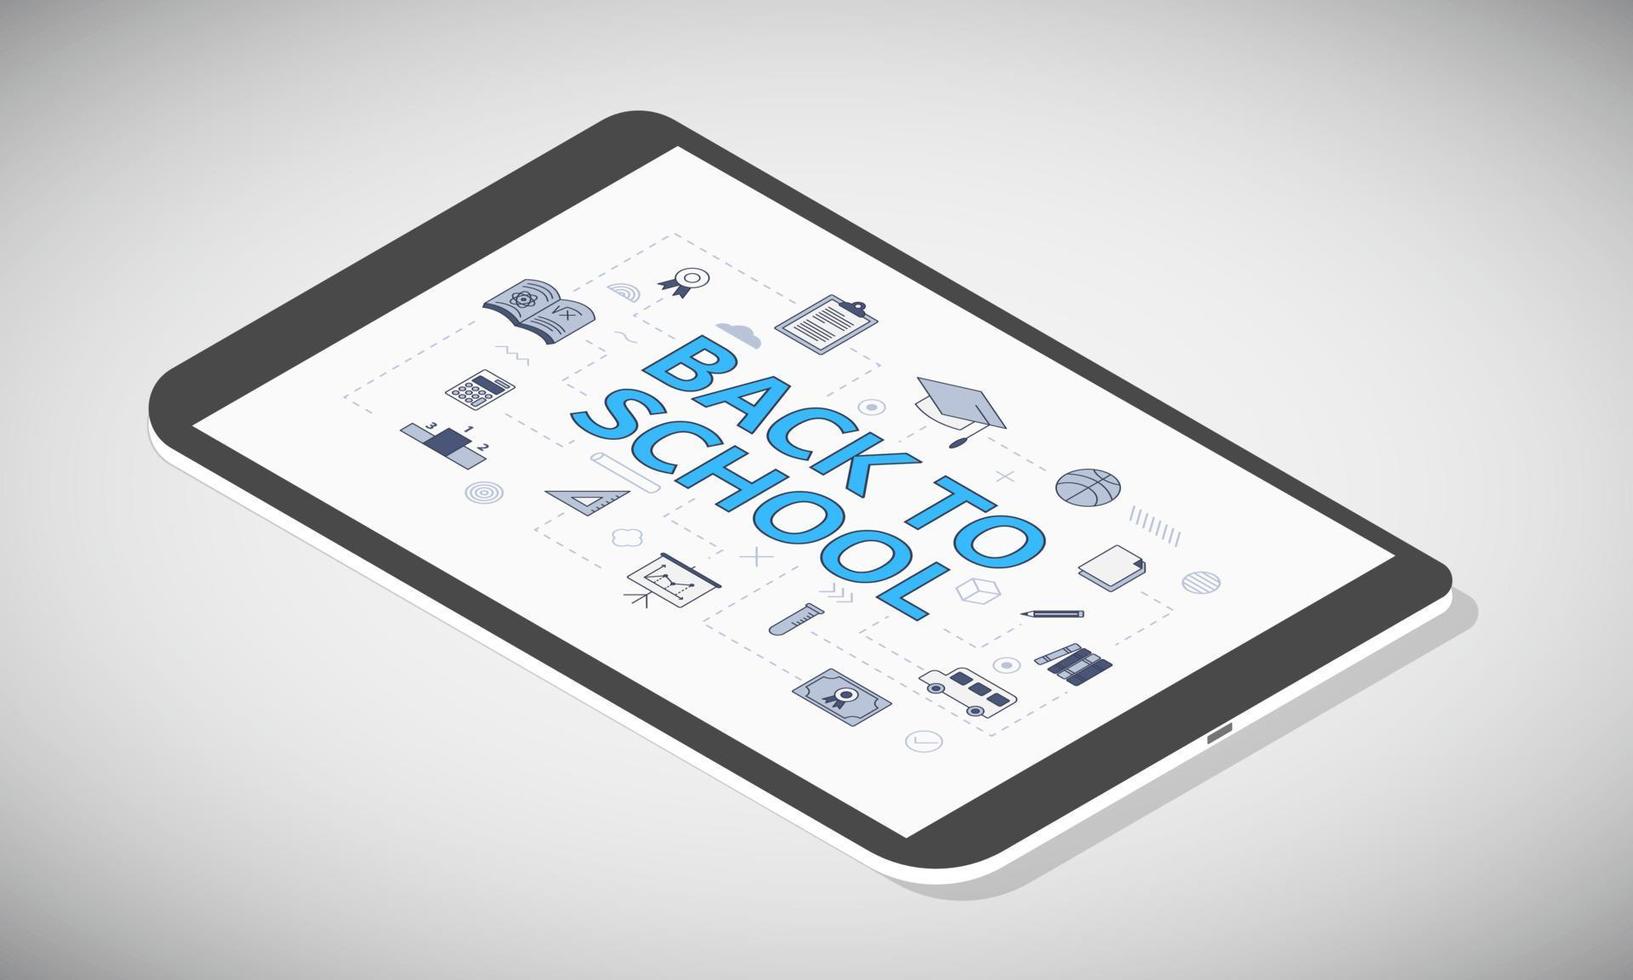 back to school concept on tablet screen with isometric 3d style vector